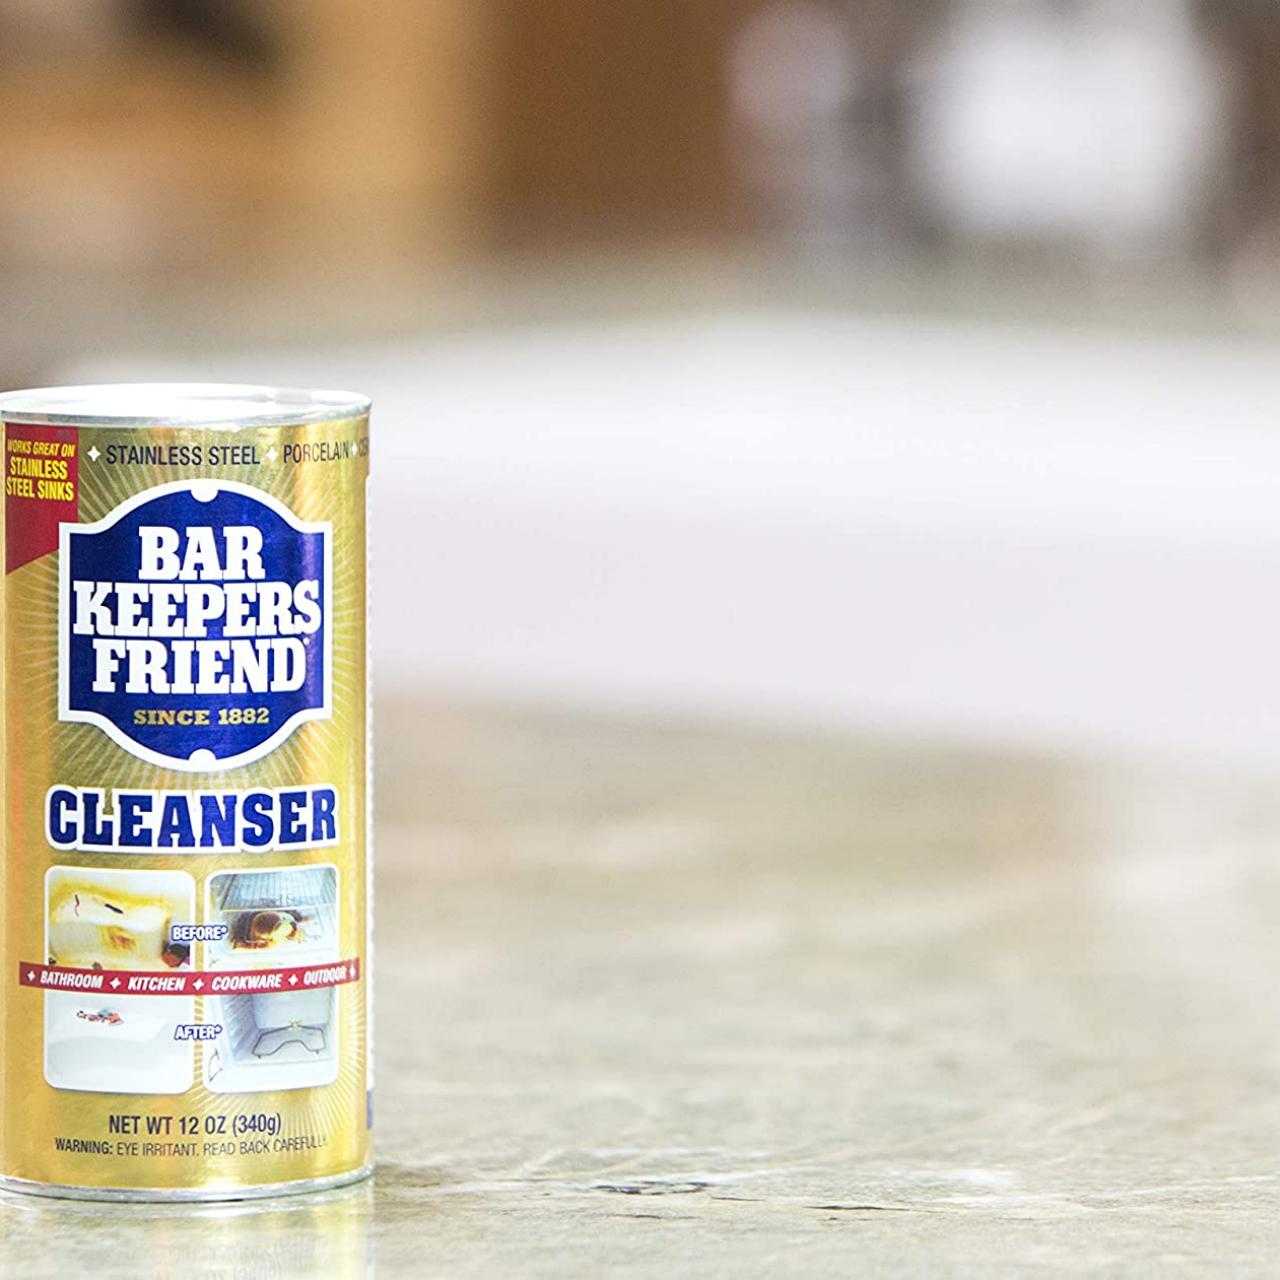 How to Use Bar Keepers Friend  FN Dish - Behind-the-Scenes, Food